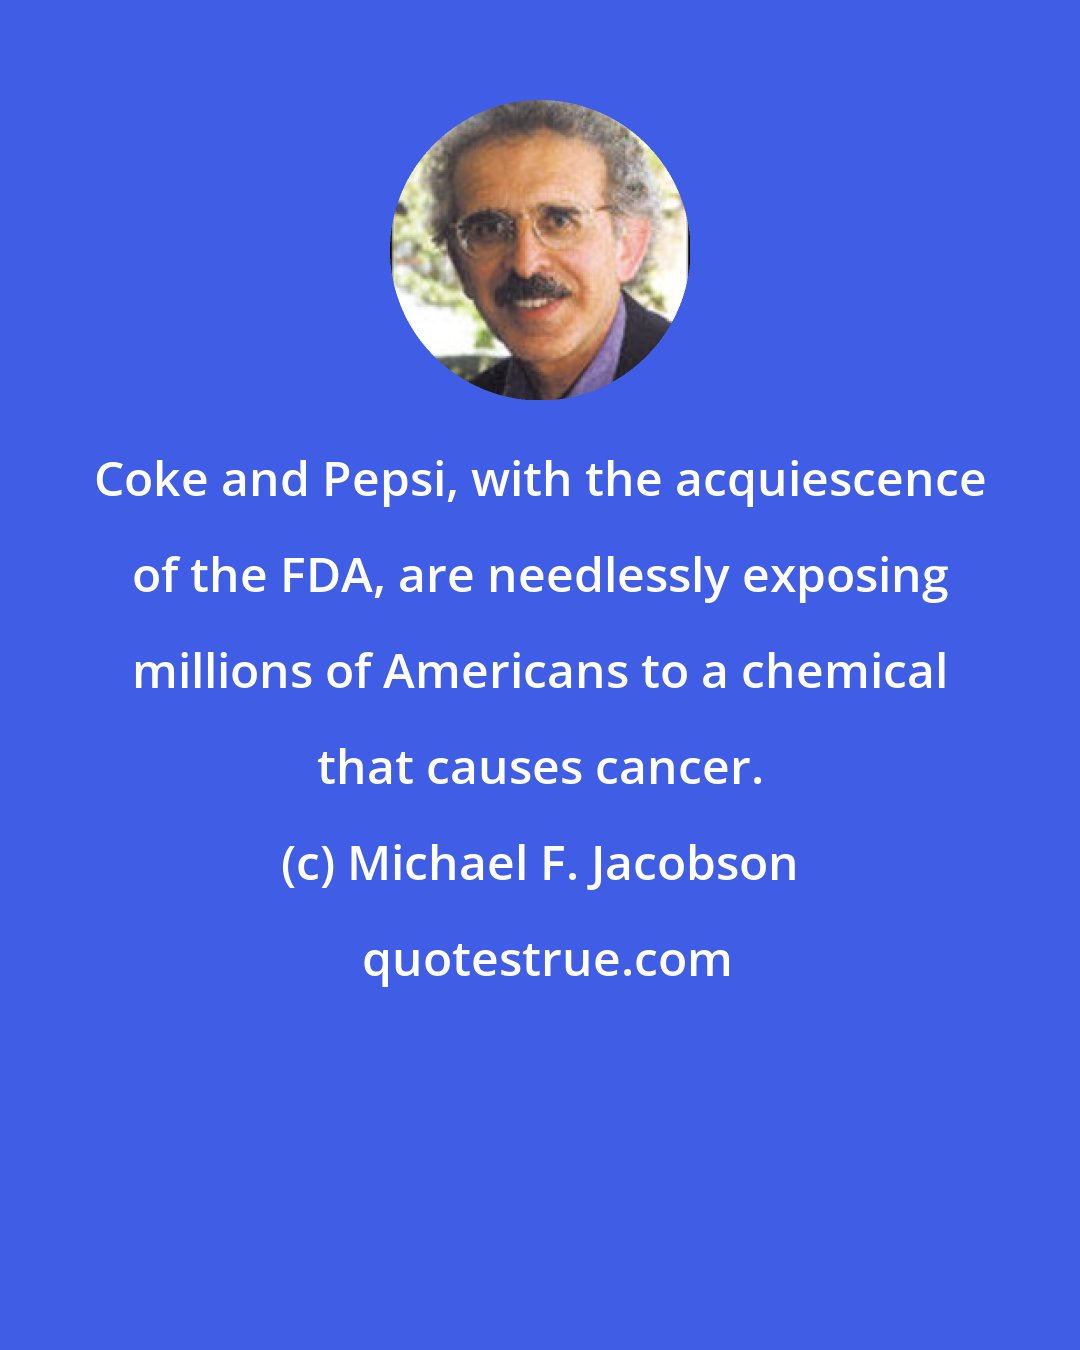 Michael F. Jacobson: Coke and Pepsi, with the acquiescence of the FDA, are needlessly exposing millions of Americans to a chemical that causes cancer.